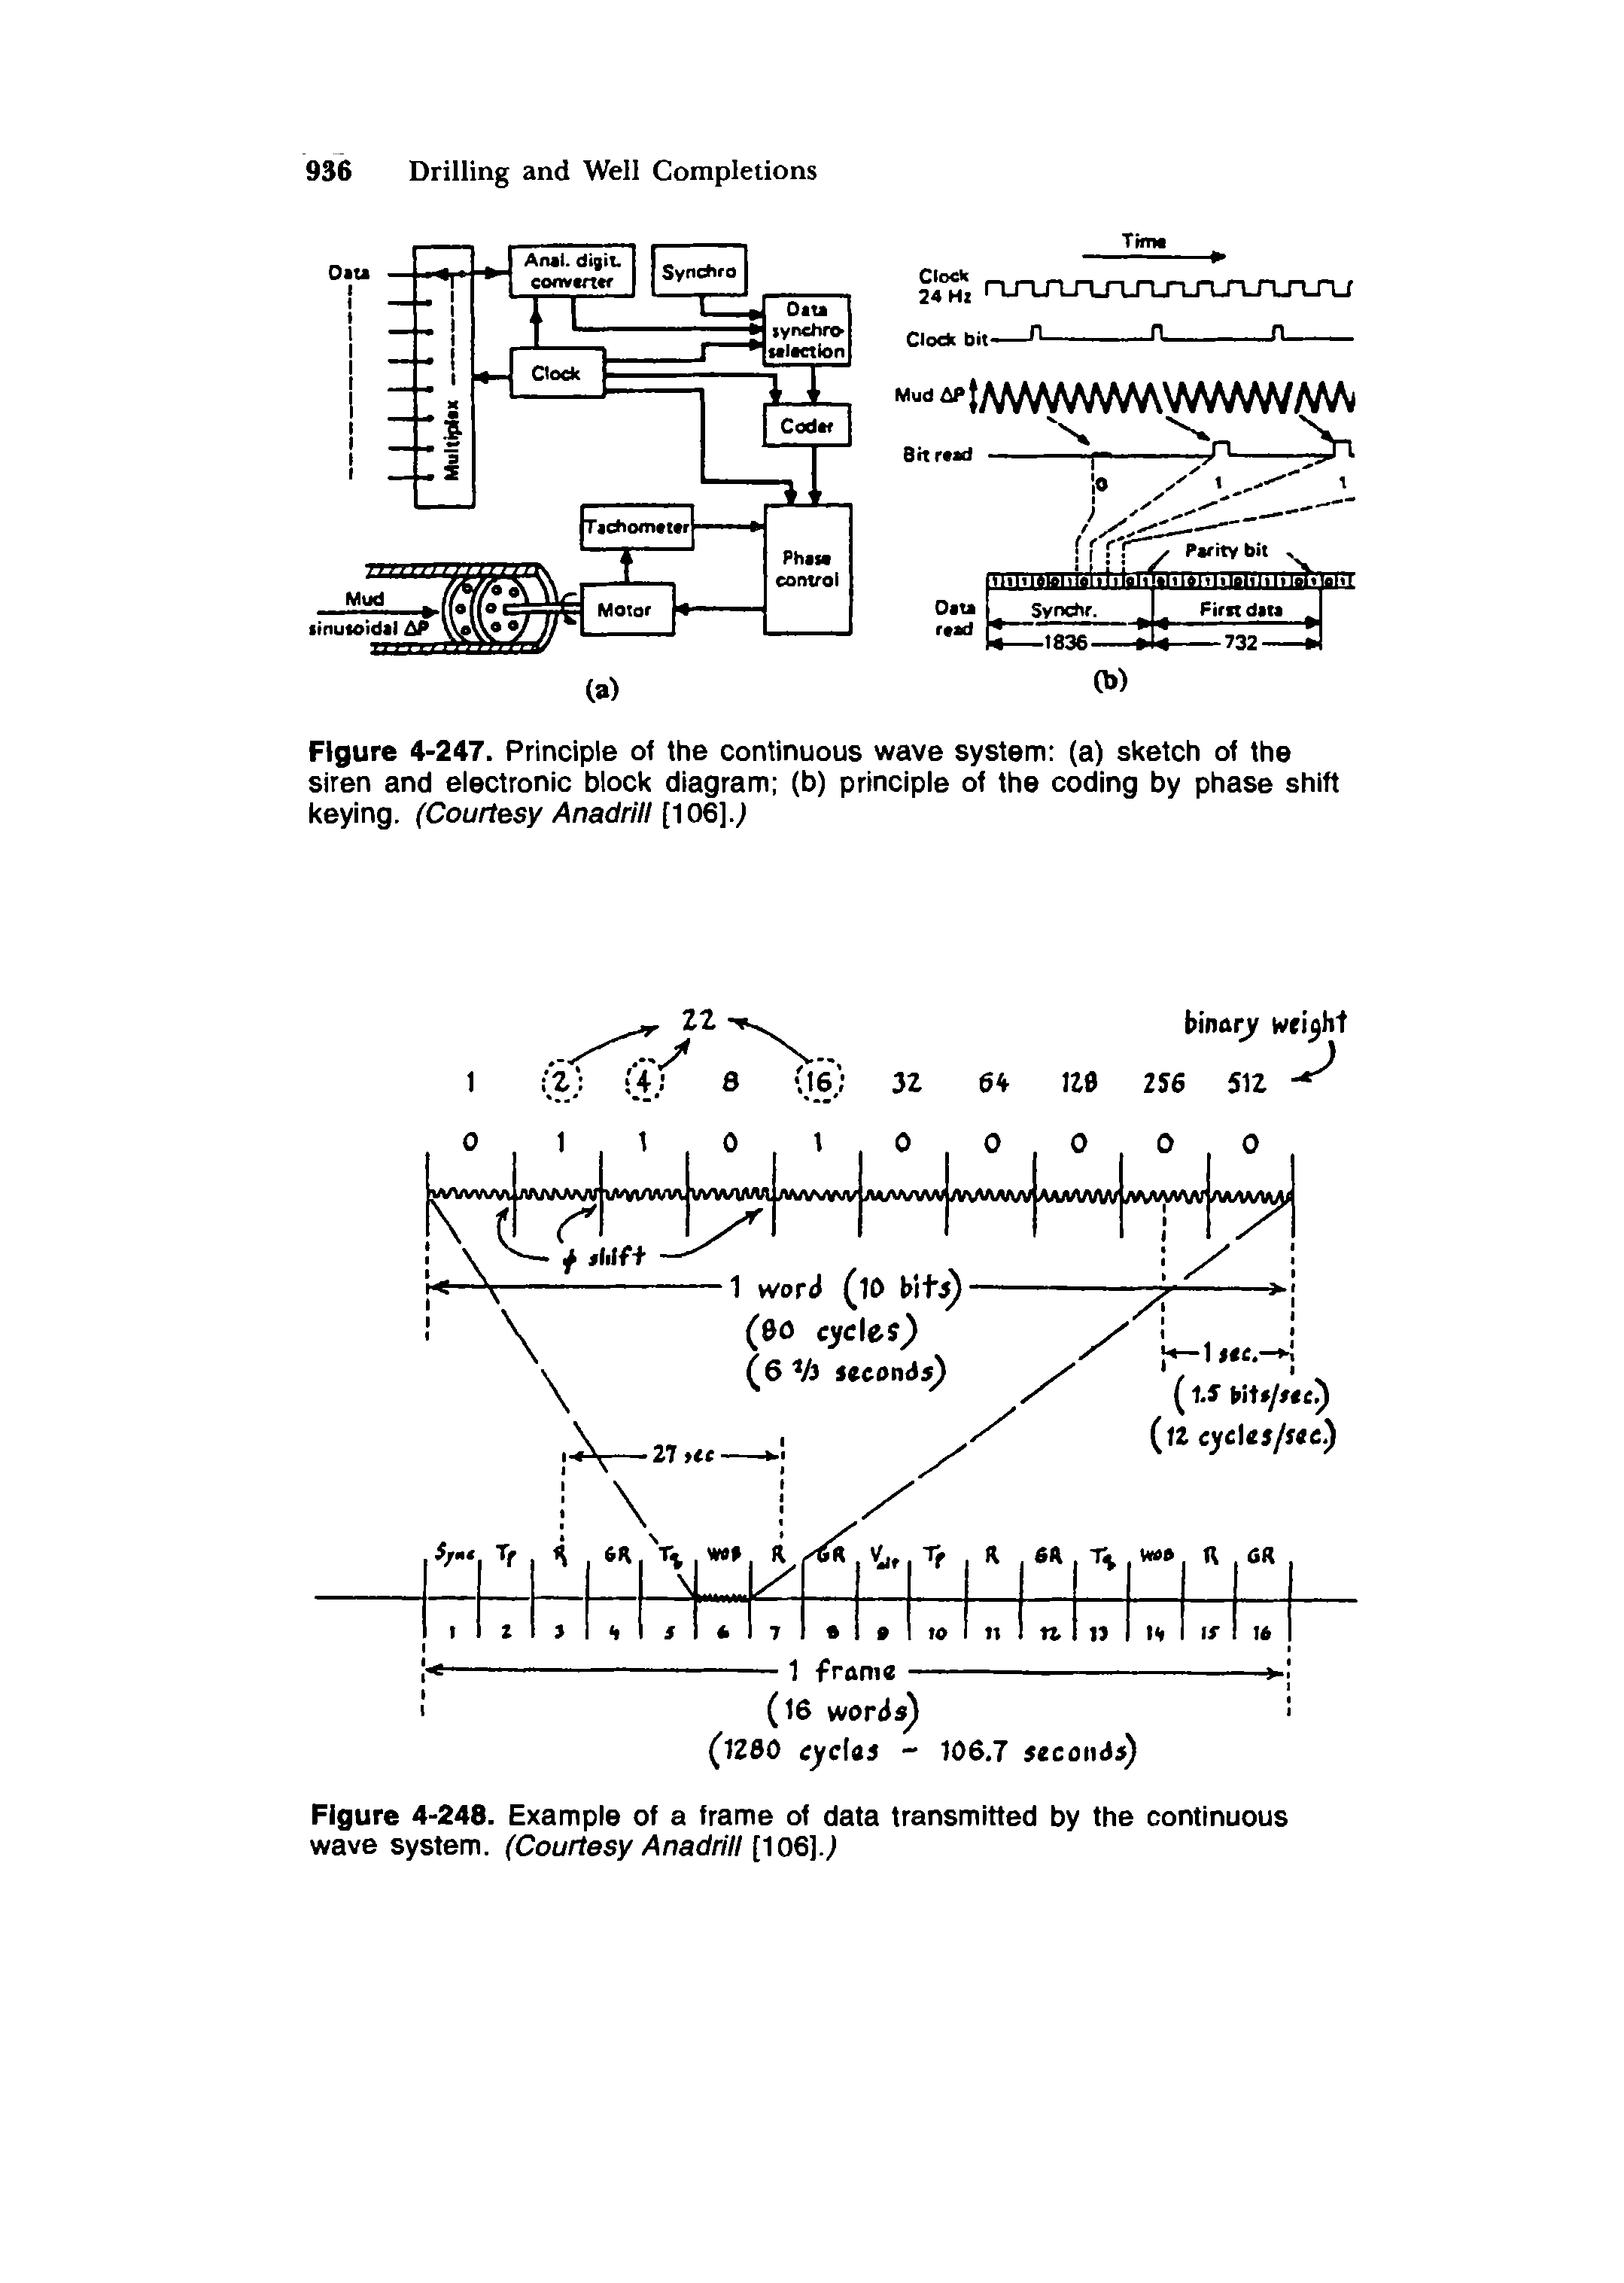 Figure 4-247. Principle of the continuous wave system (a) sketch of the siren and electronic block diagram (b) principle of the coding by phase shift keying. (Courtesy Anadrill [106].. ...